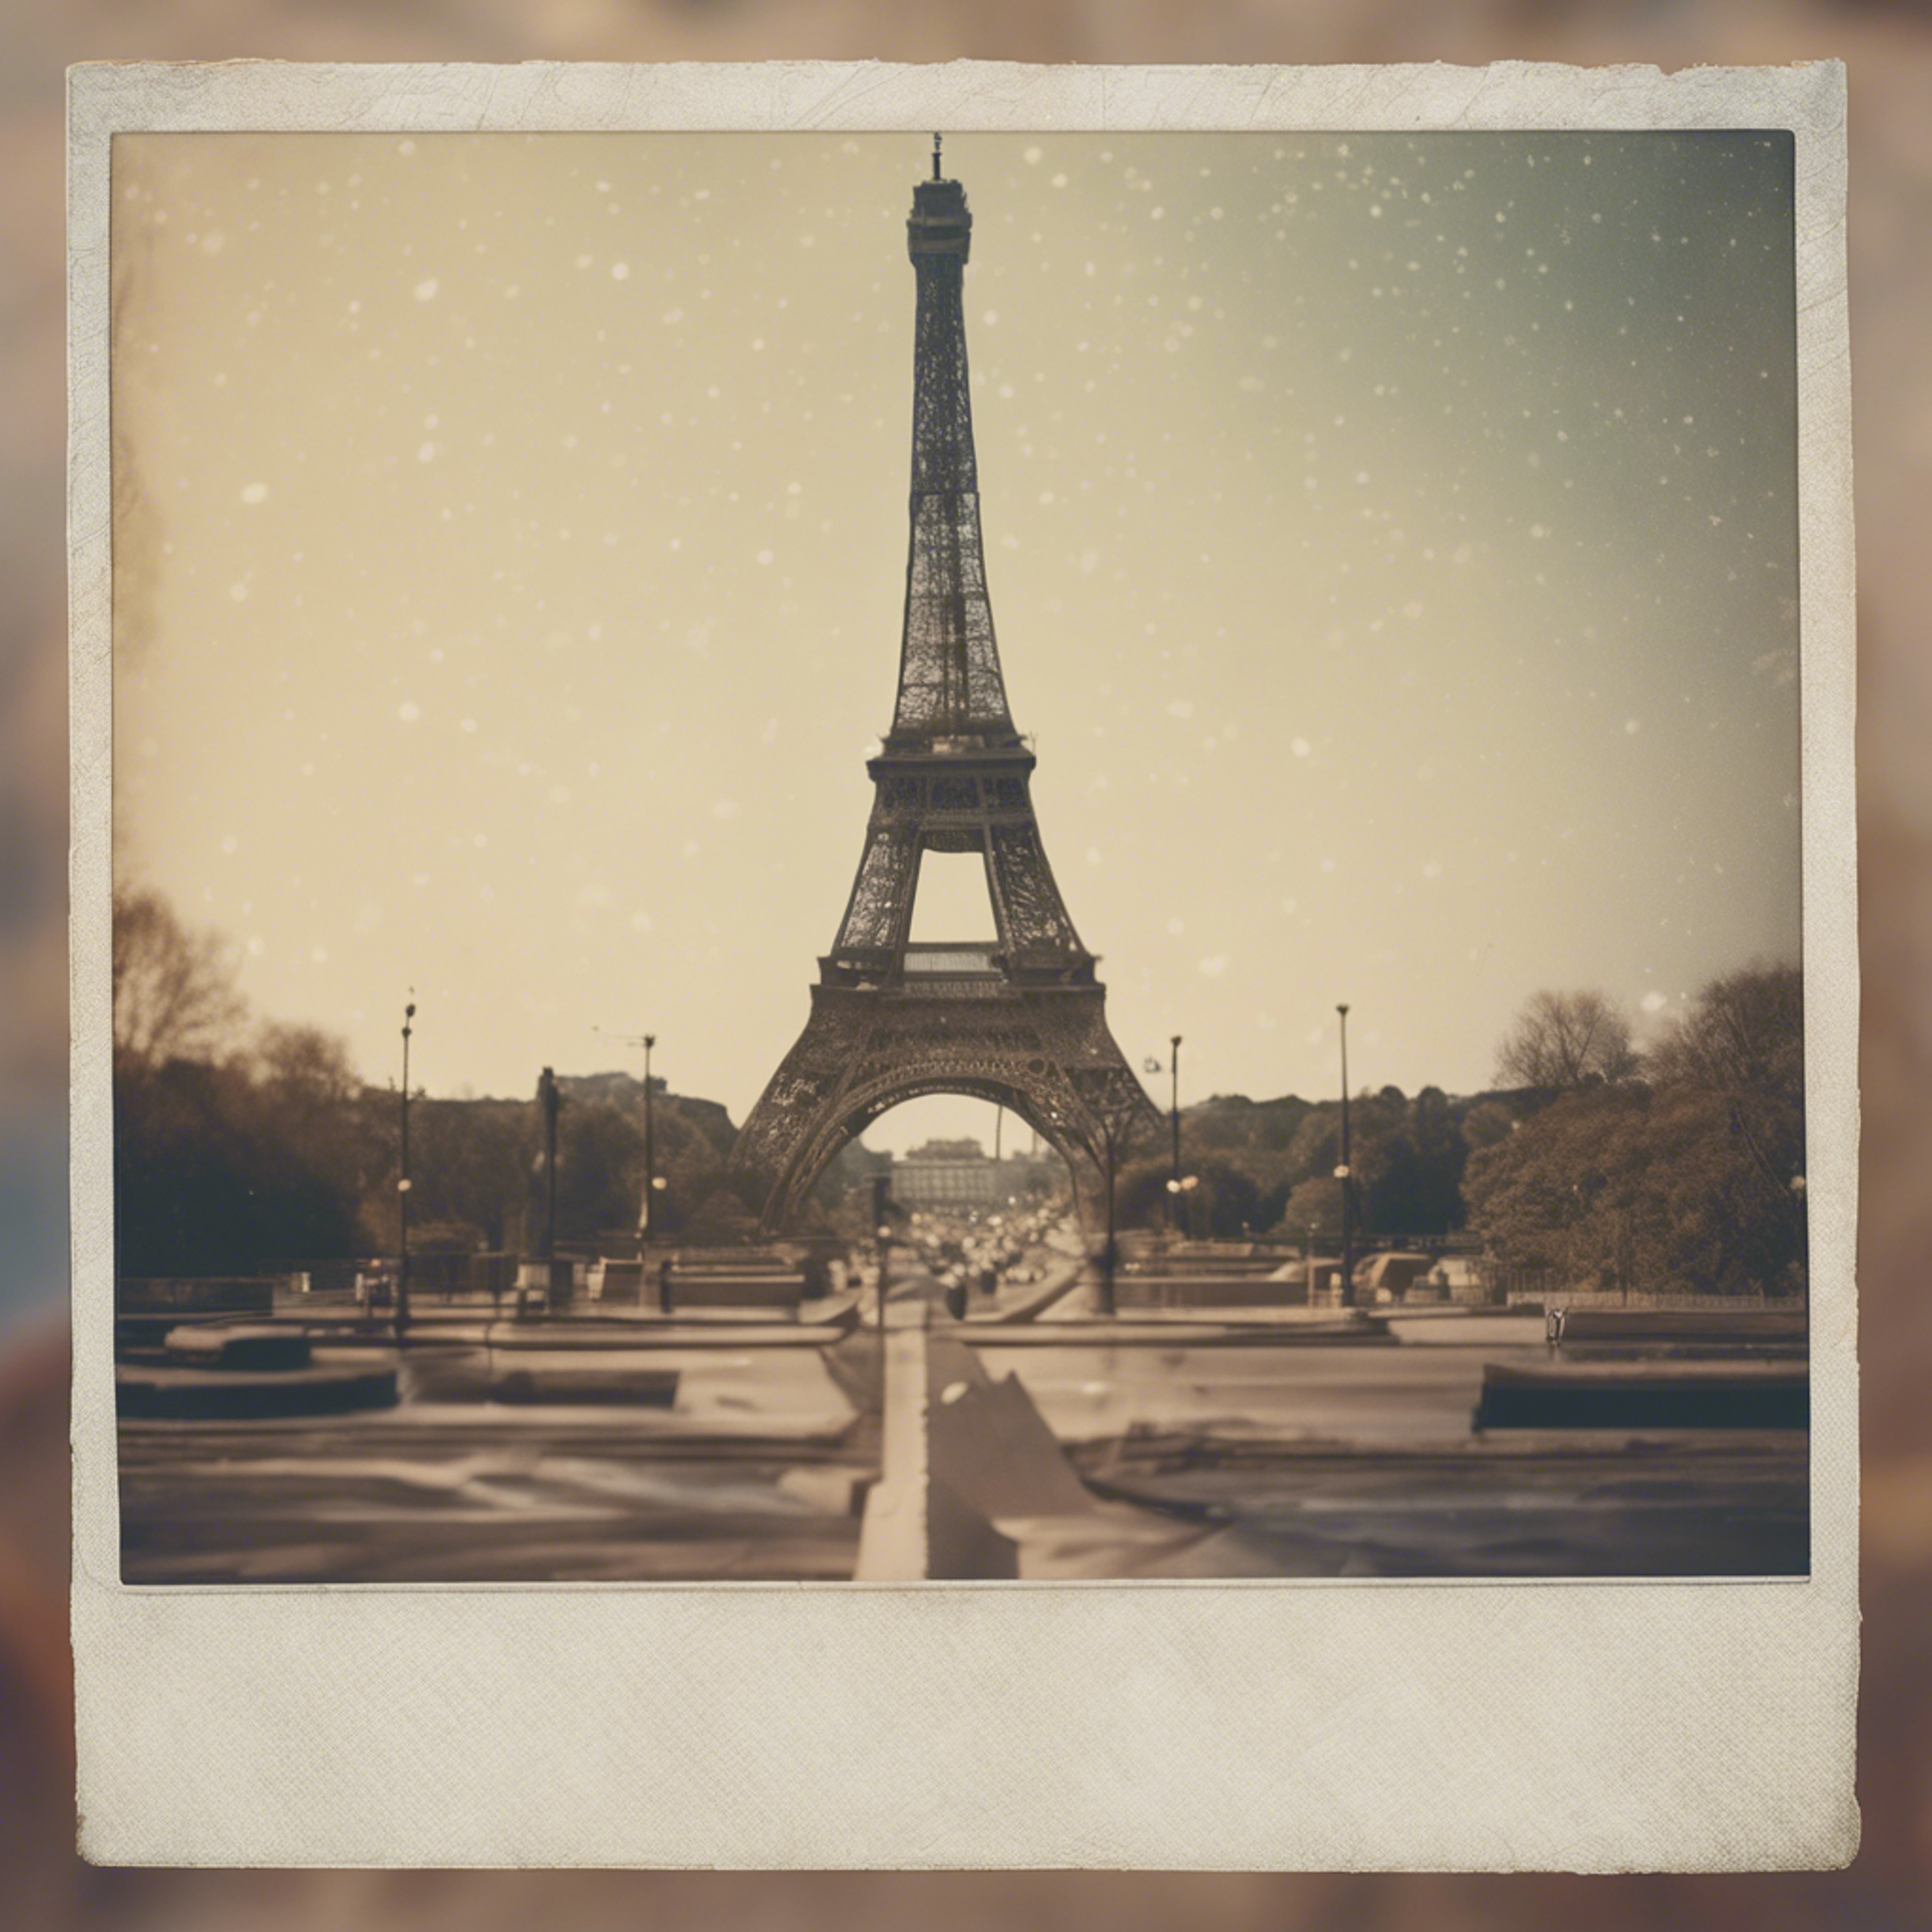 A faded beige Polaroid picture of an iconic landmark from the 70s. Taustakuva[3ceb93f71d2c49b28cf4]